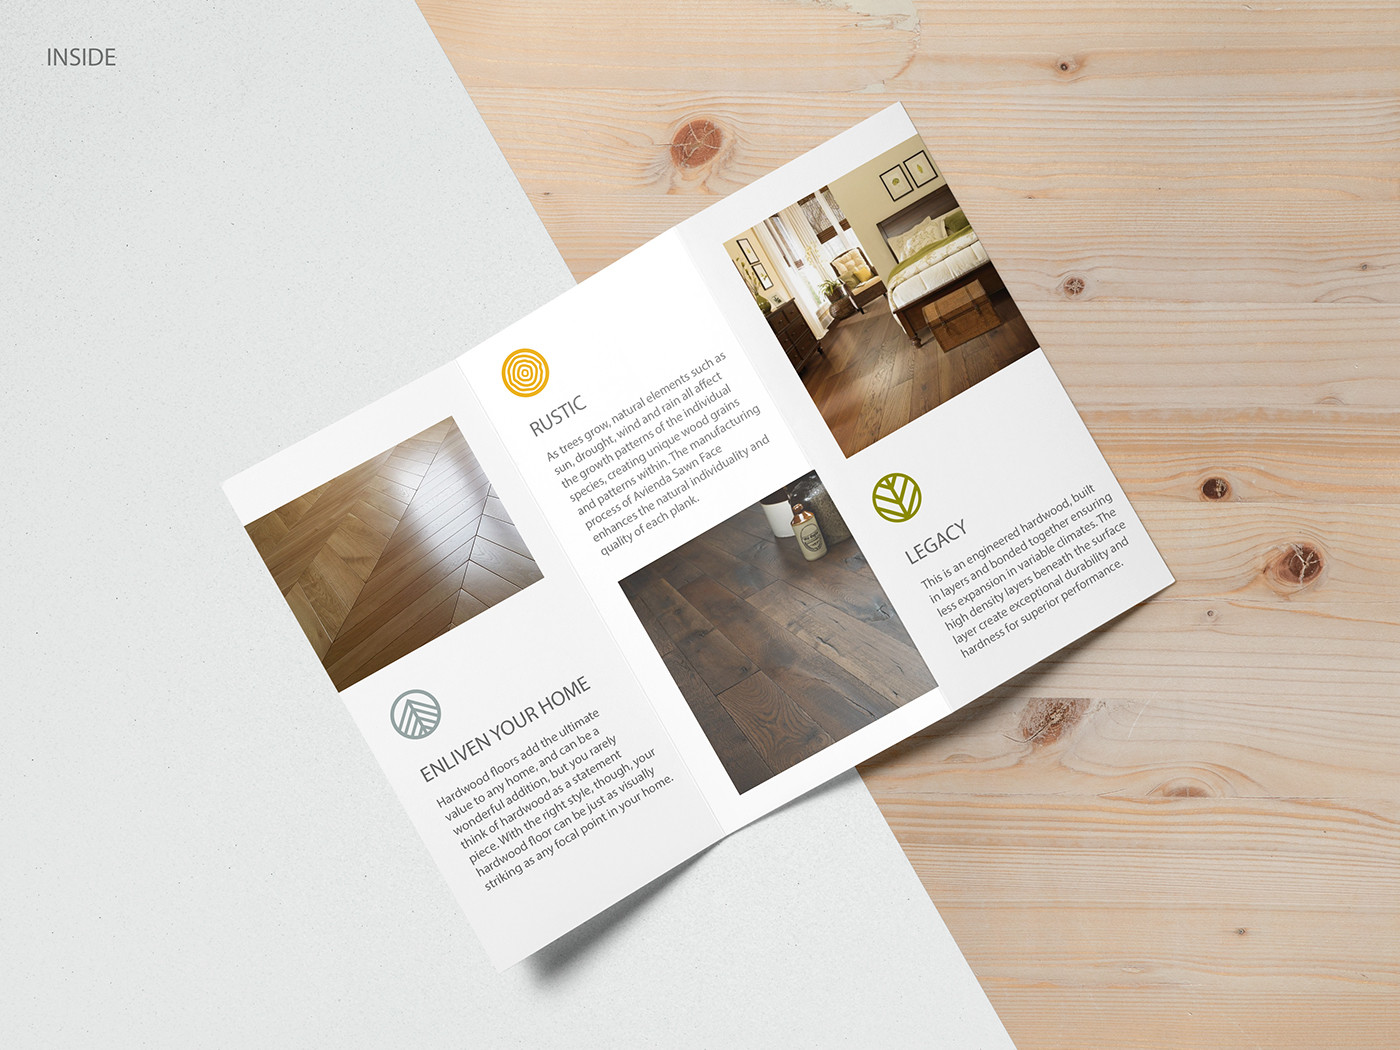 28 attractive Hardwood Flooring Nashua Nh 2024 free download hardwood flooring nashua nh of avienda flooring rebrand on behance with i utilized color and iconography to differentiate the three marks but unified them under the same shape and structure 